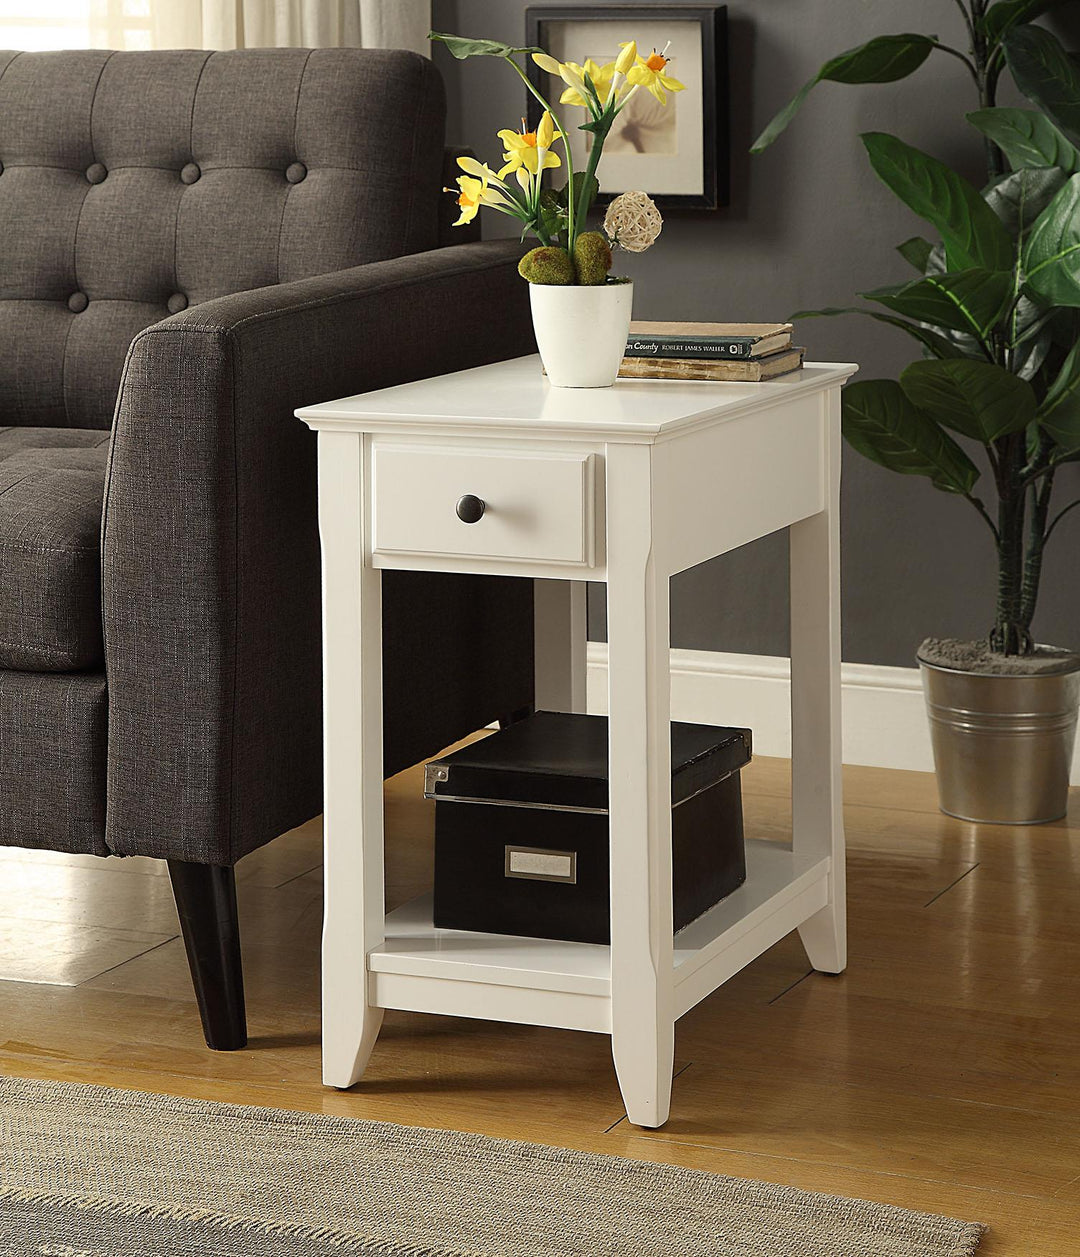 One drawer Accent Table with bottom Open Storage - White